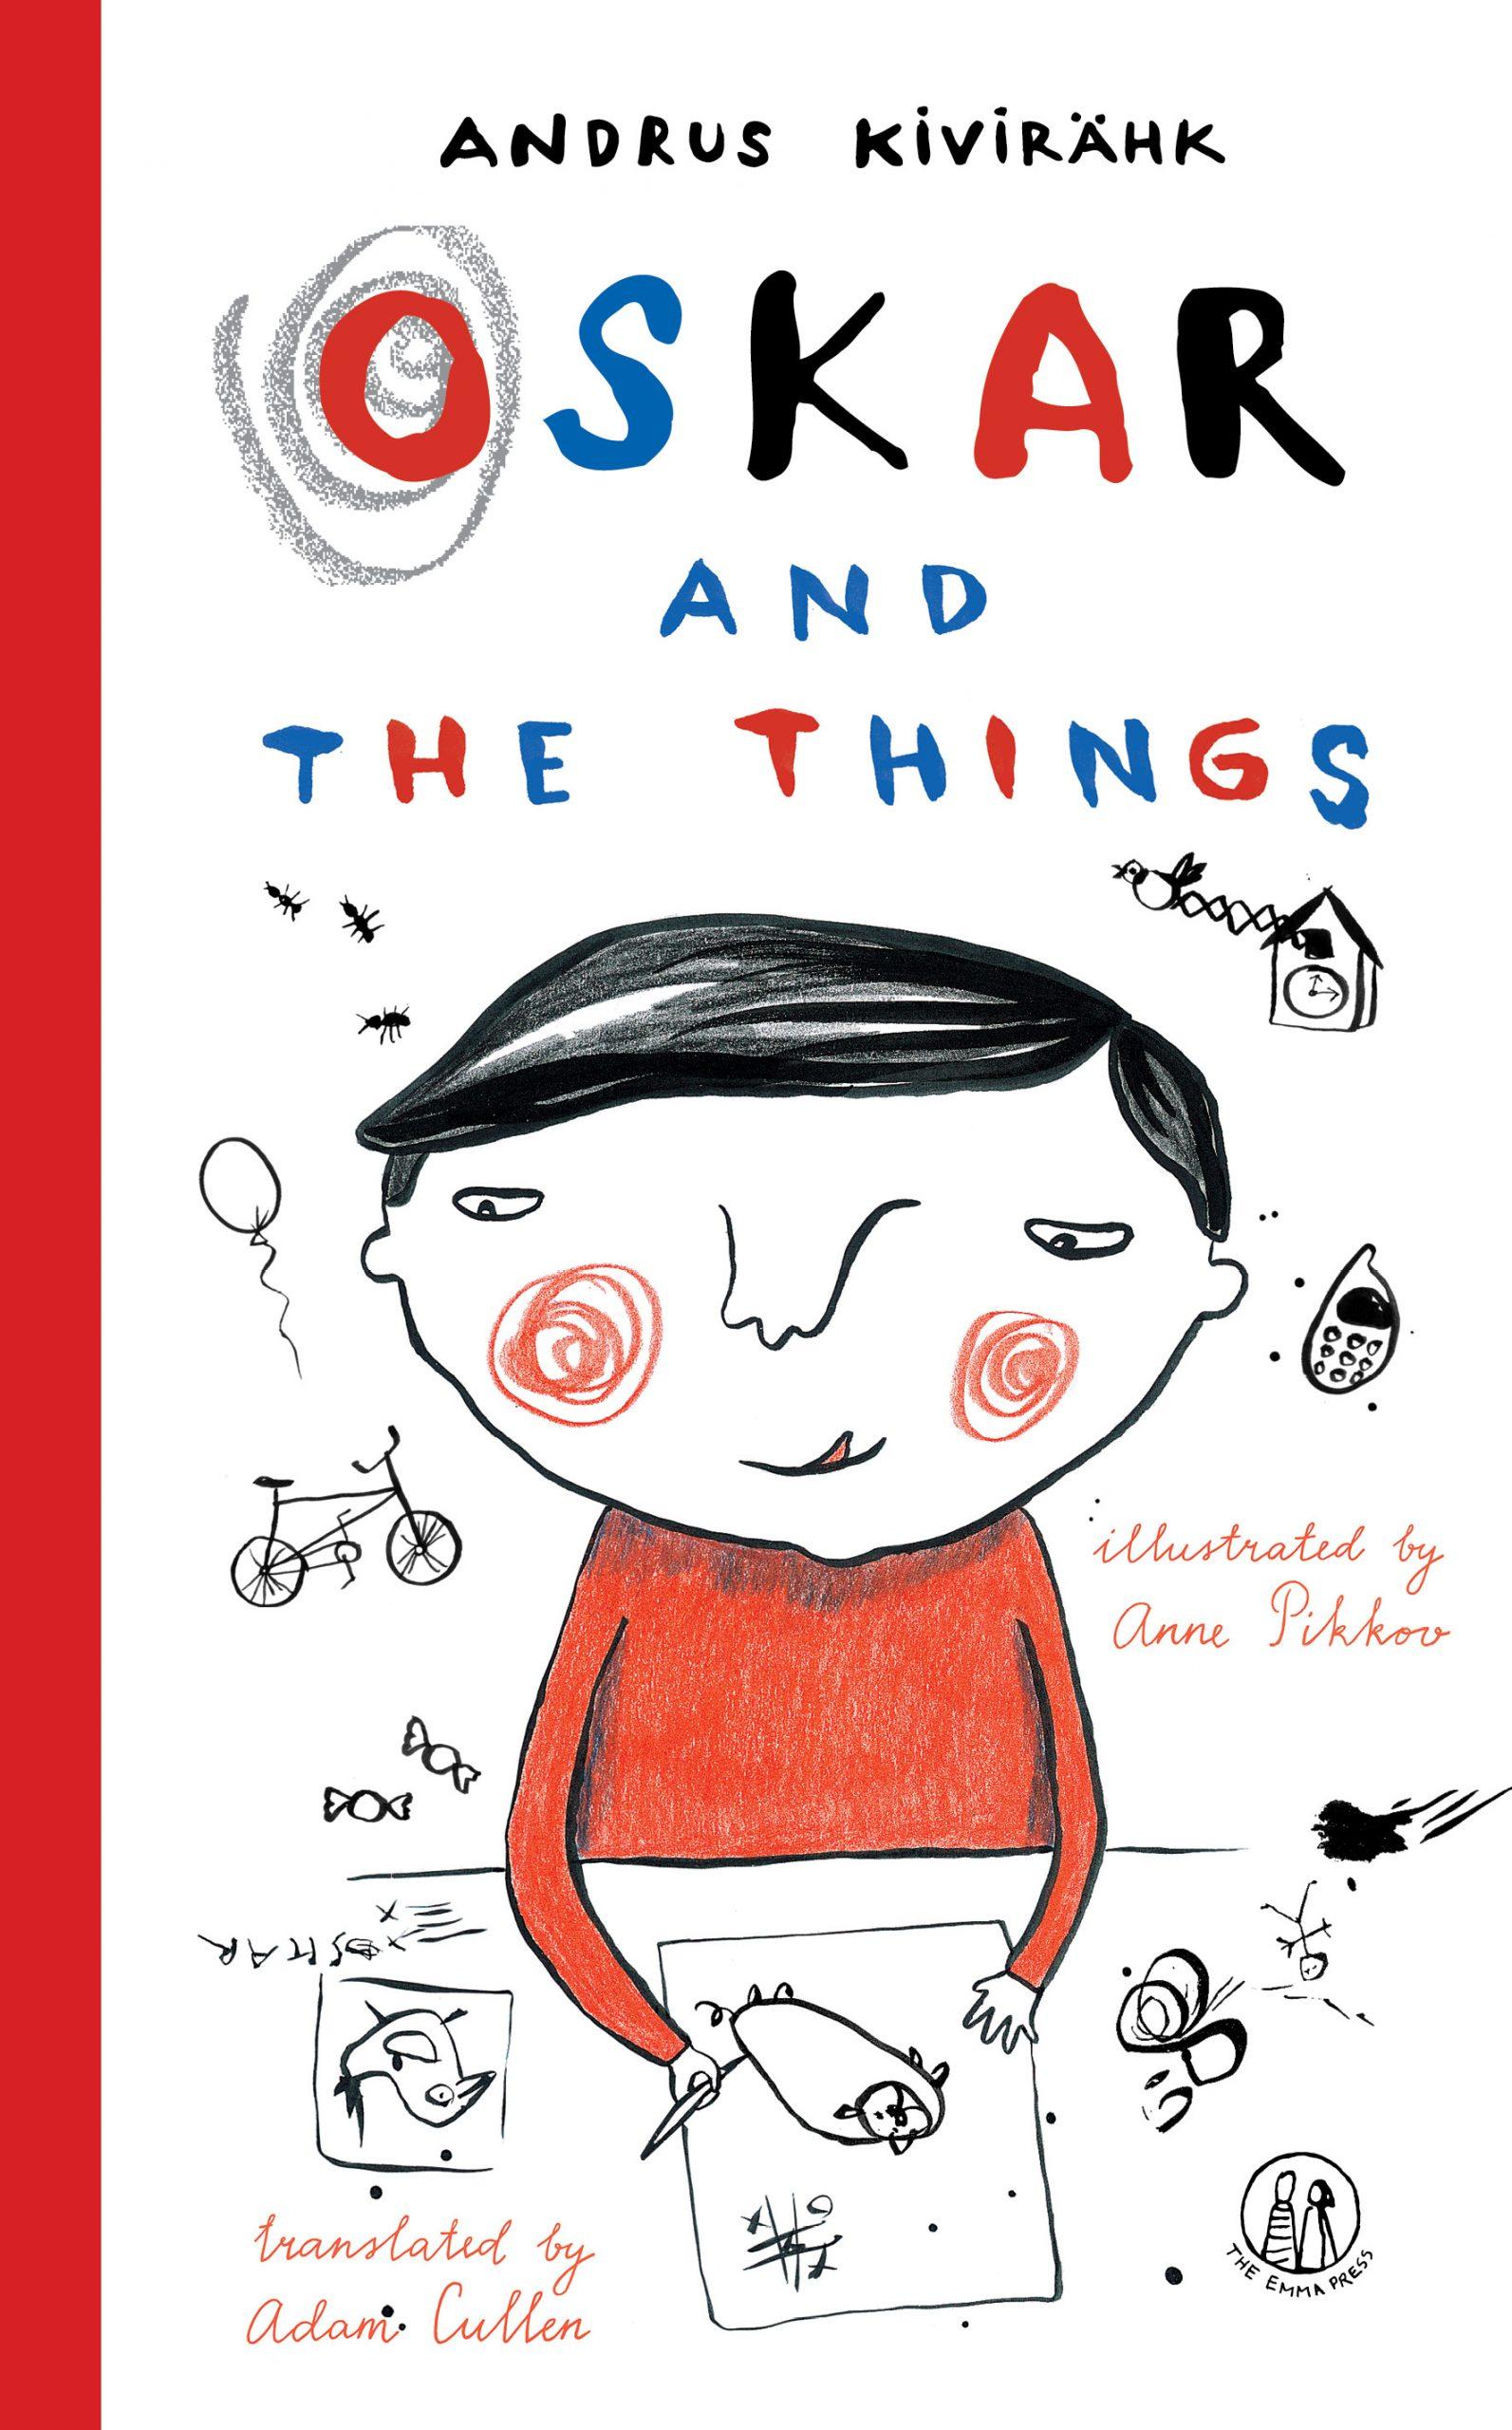 Oskar and the Things